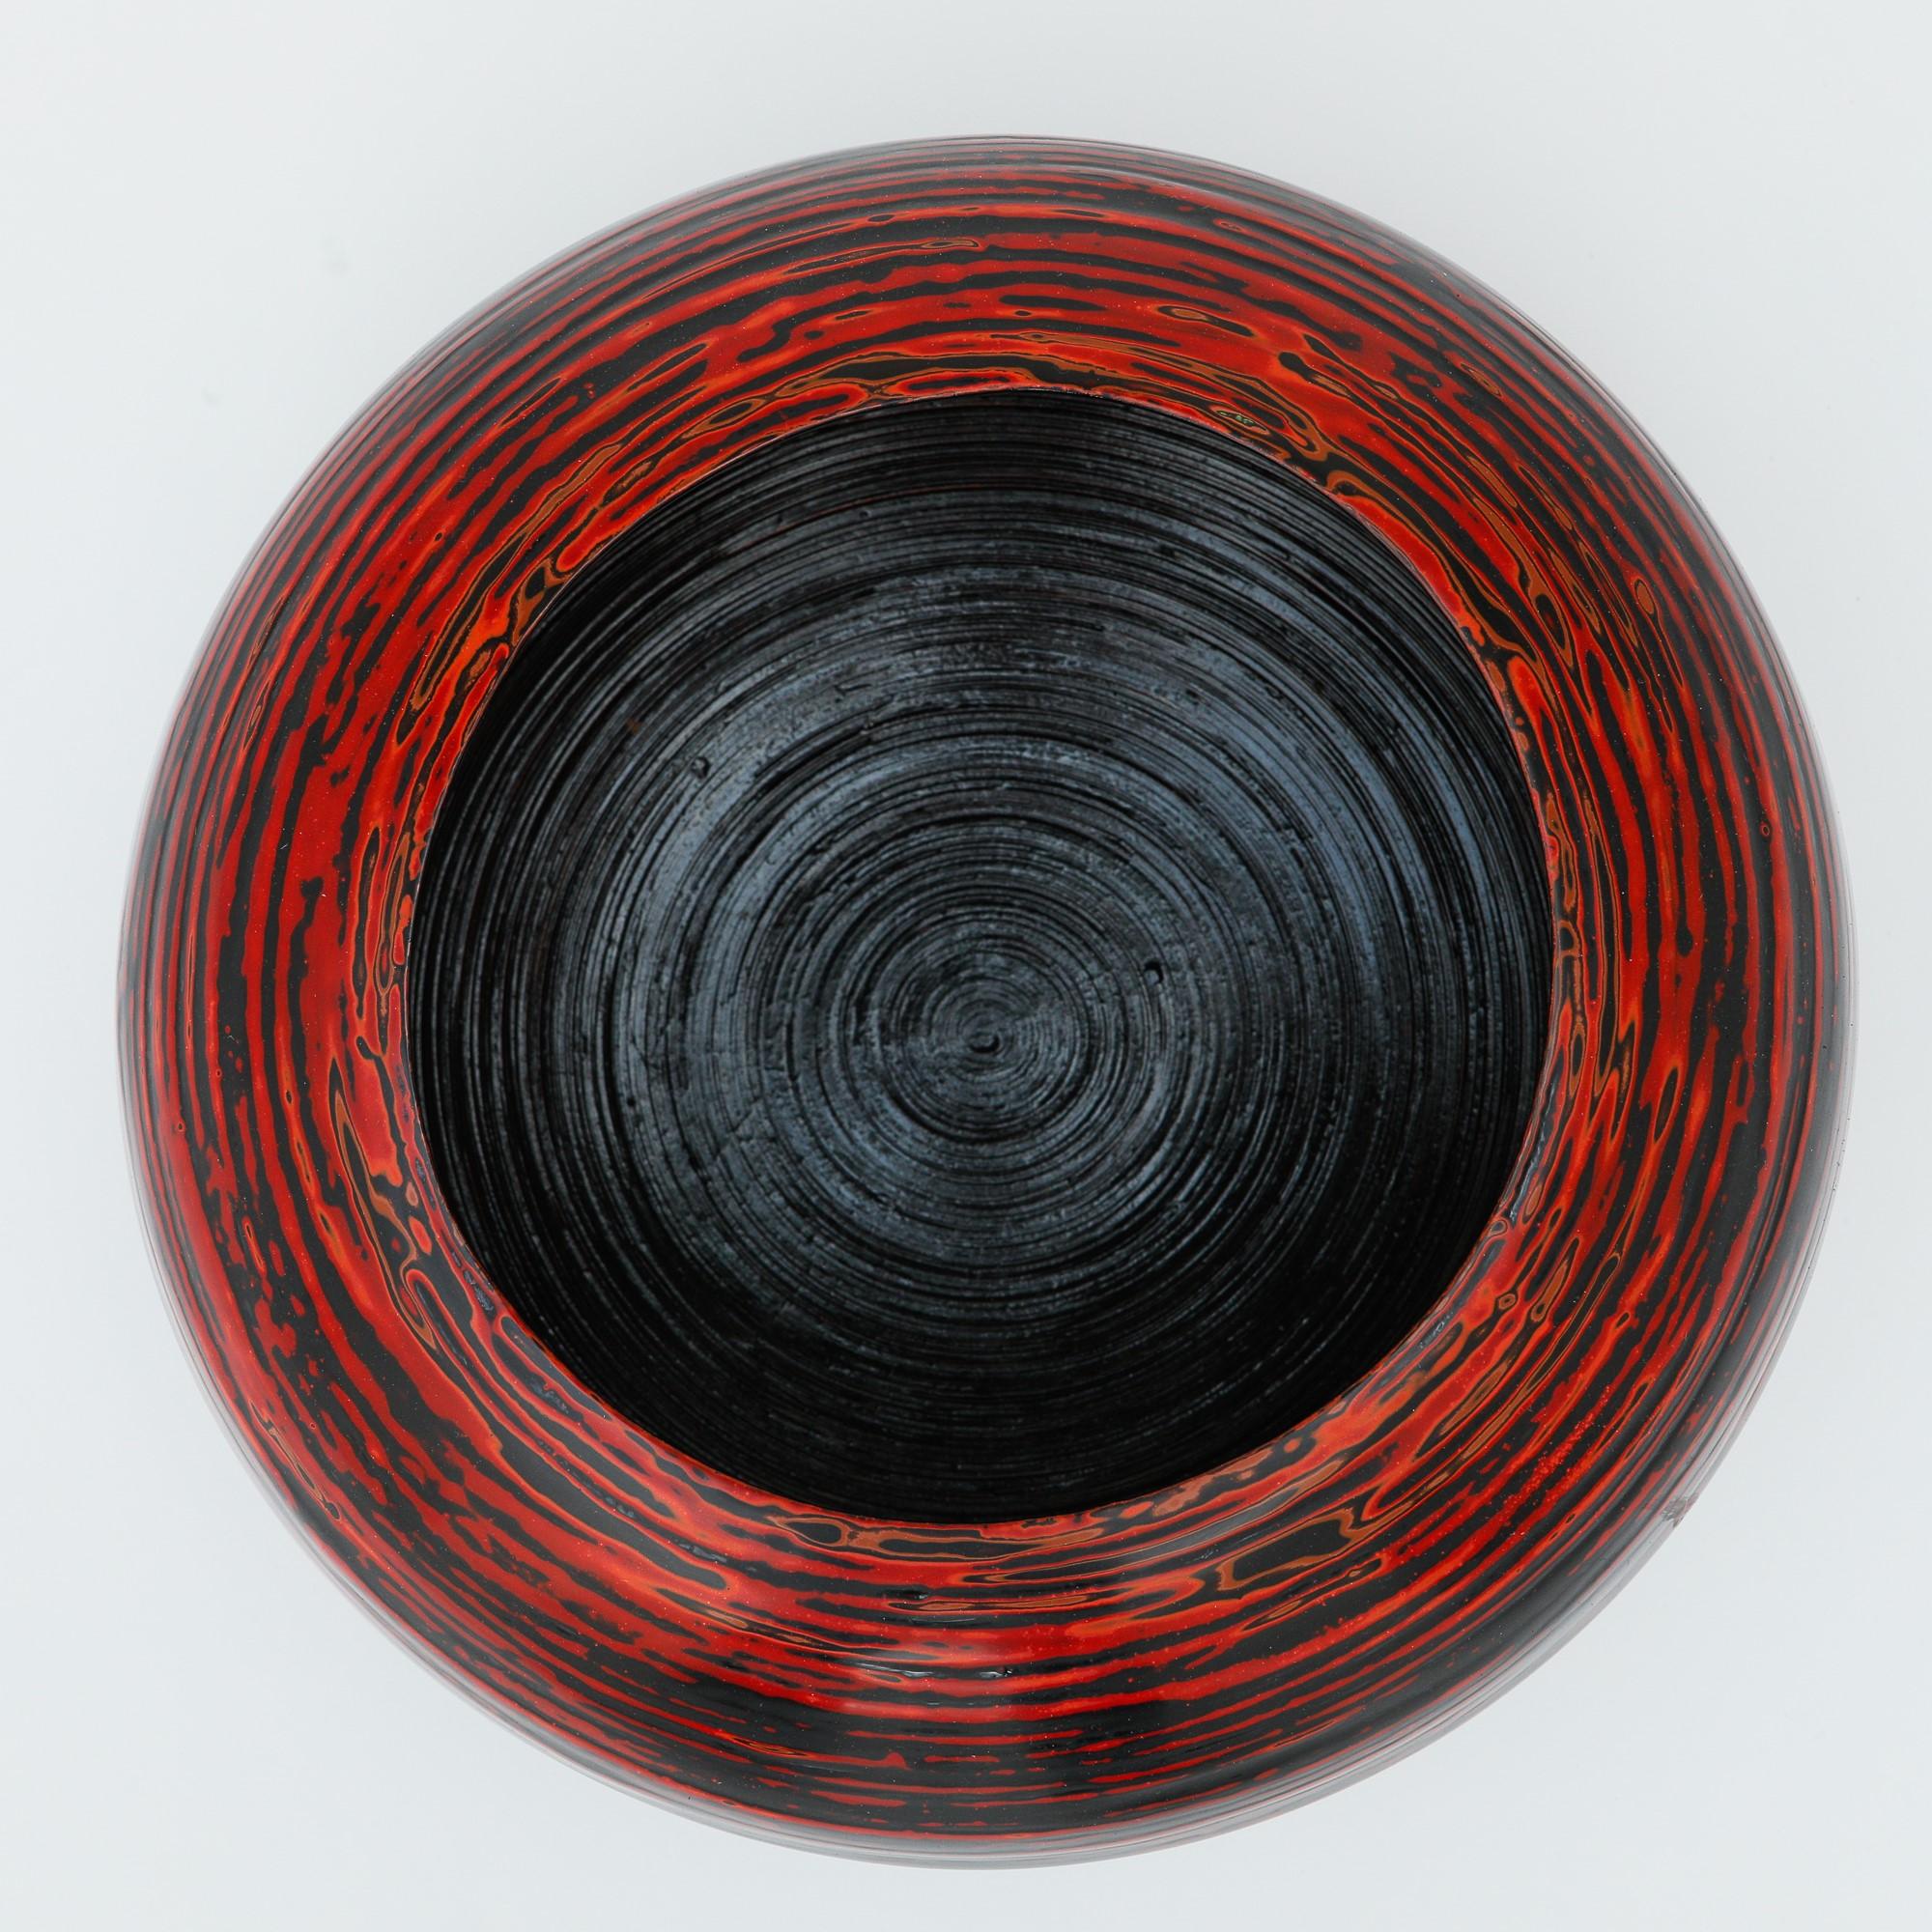 Thai Natural Urushi Negoro Red and Black Lacquer Spin Bowl by Alexander Lamont For Sale